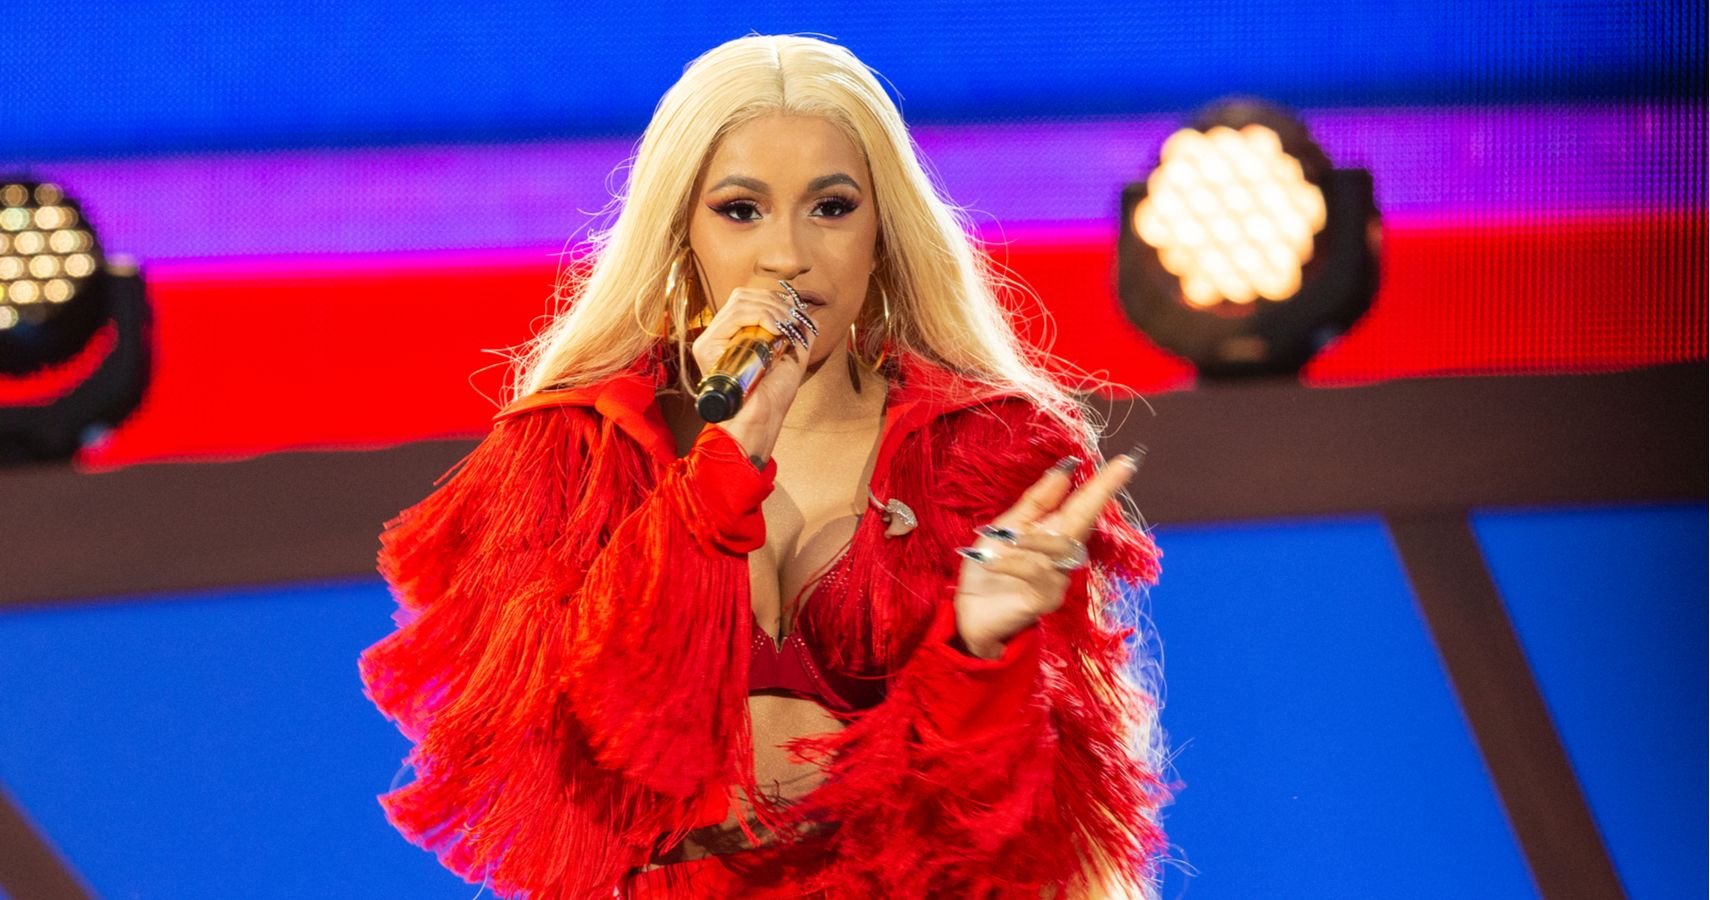 Queen Bacardi: How Cardi B Became One Of The Most Influential Rappers Of The New Age